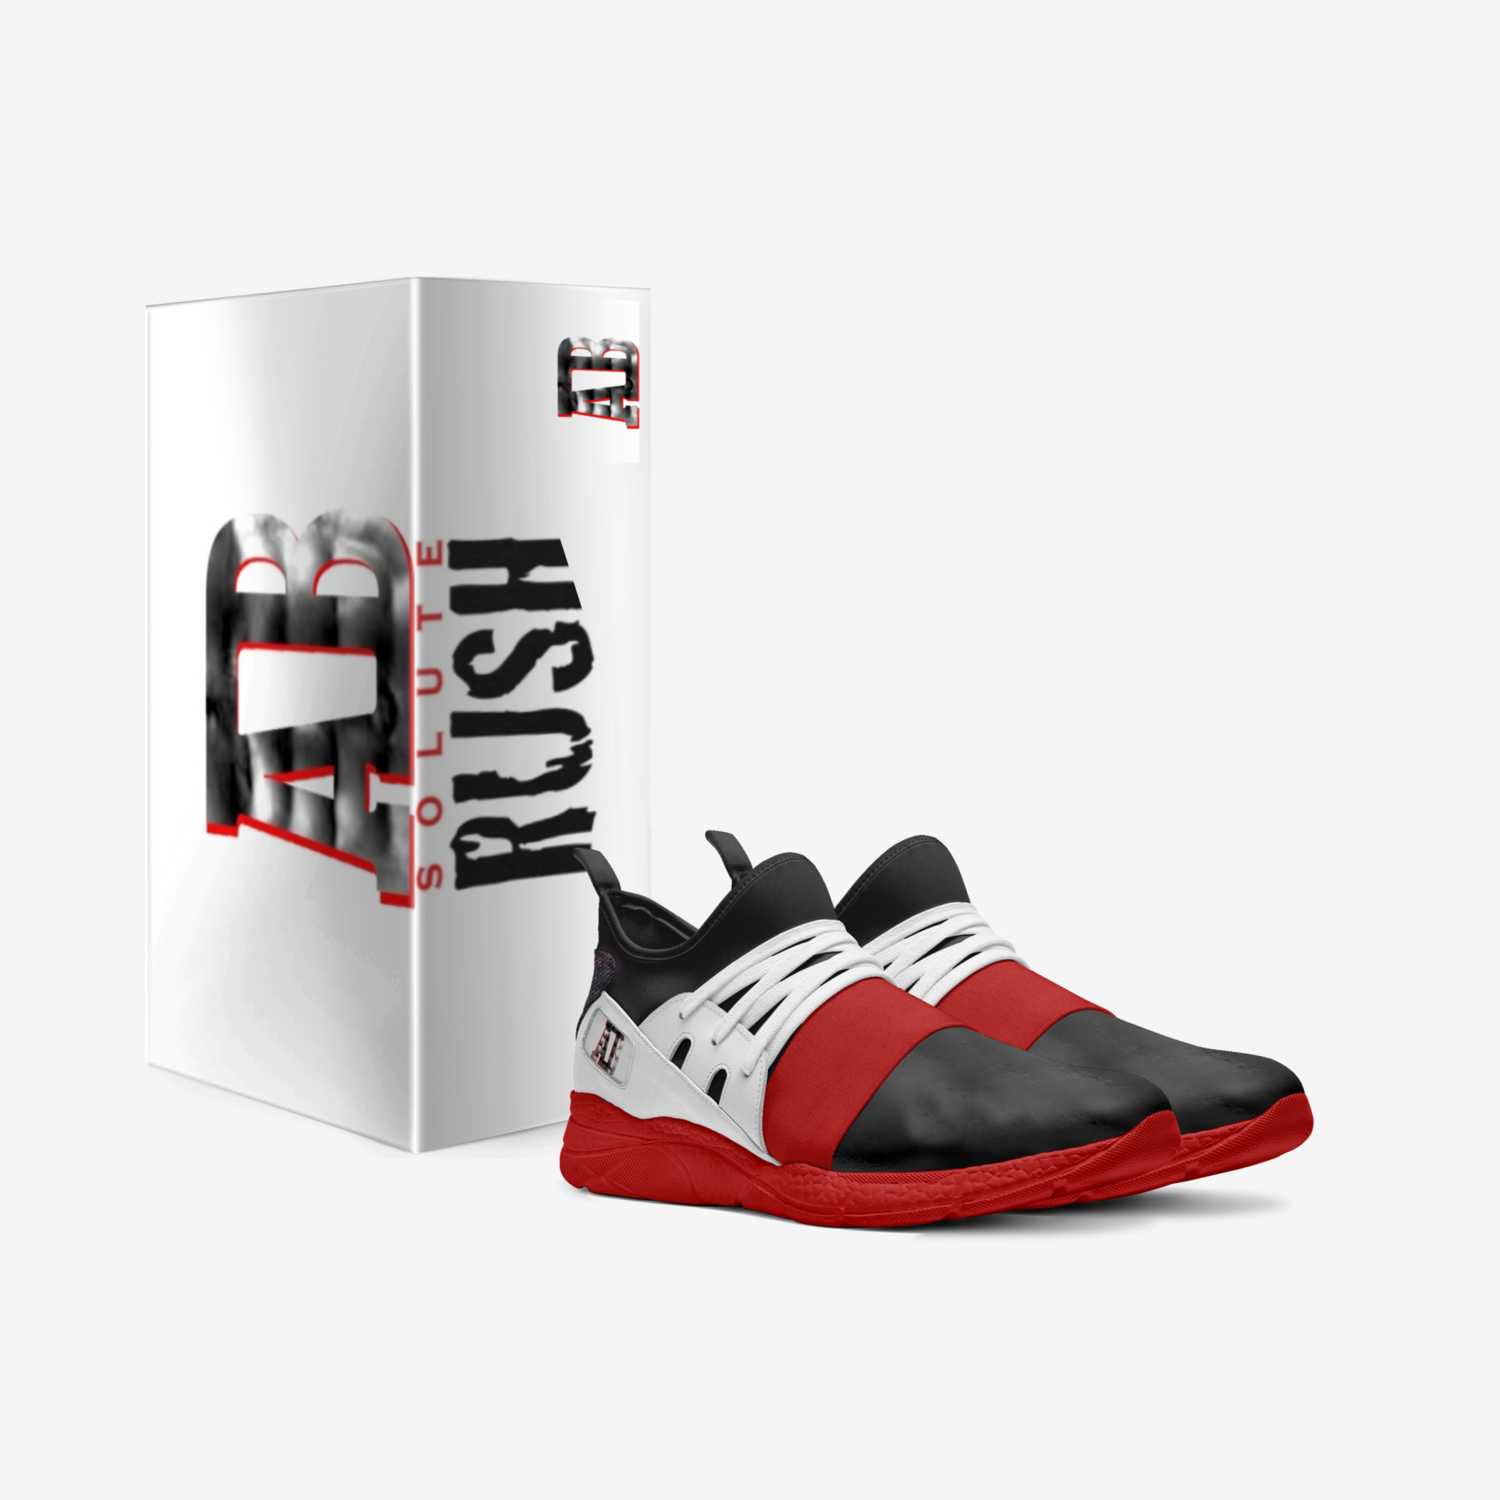 3D RUSH  custom made in Italy shoes by Andrew Scott | Box view